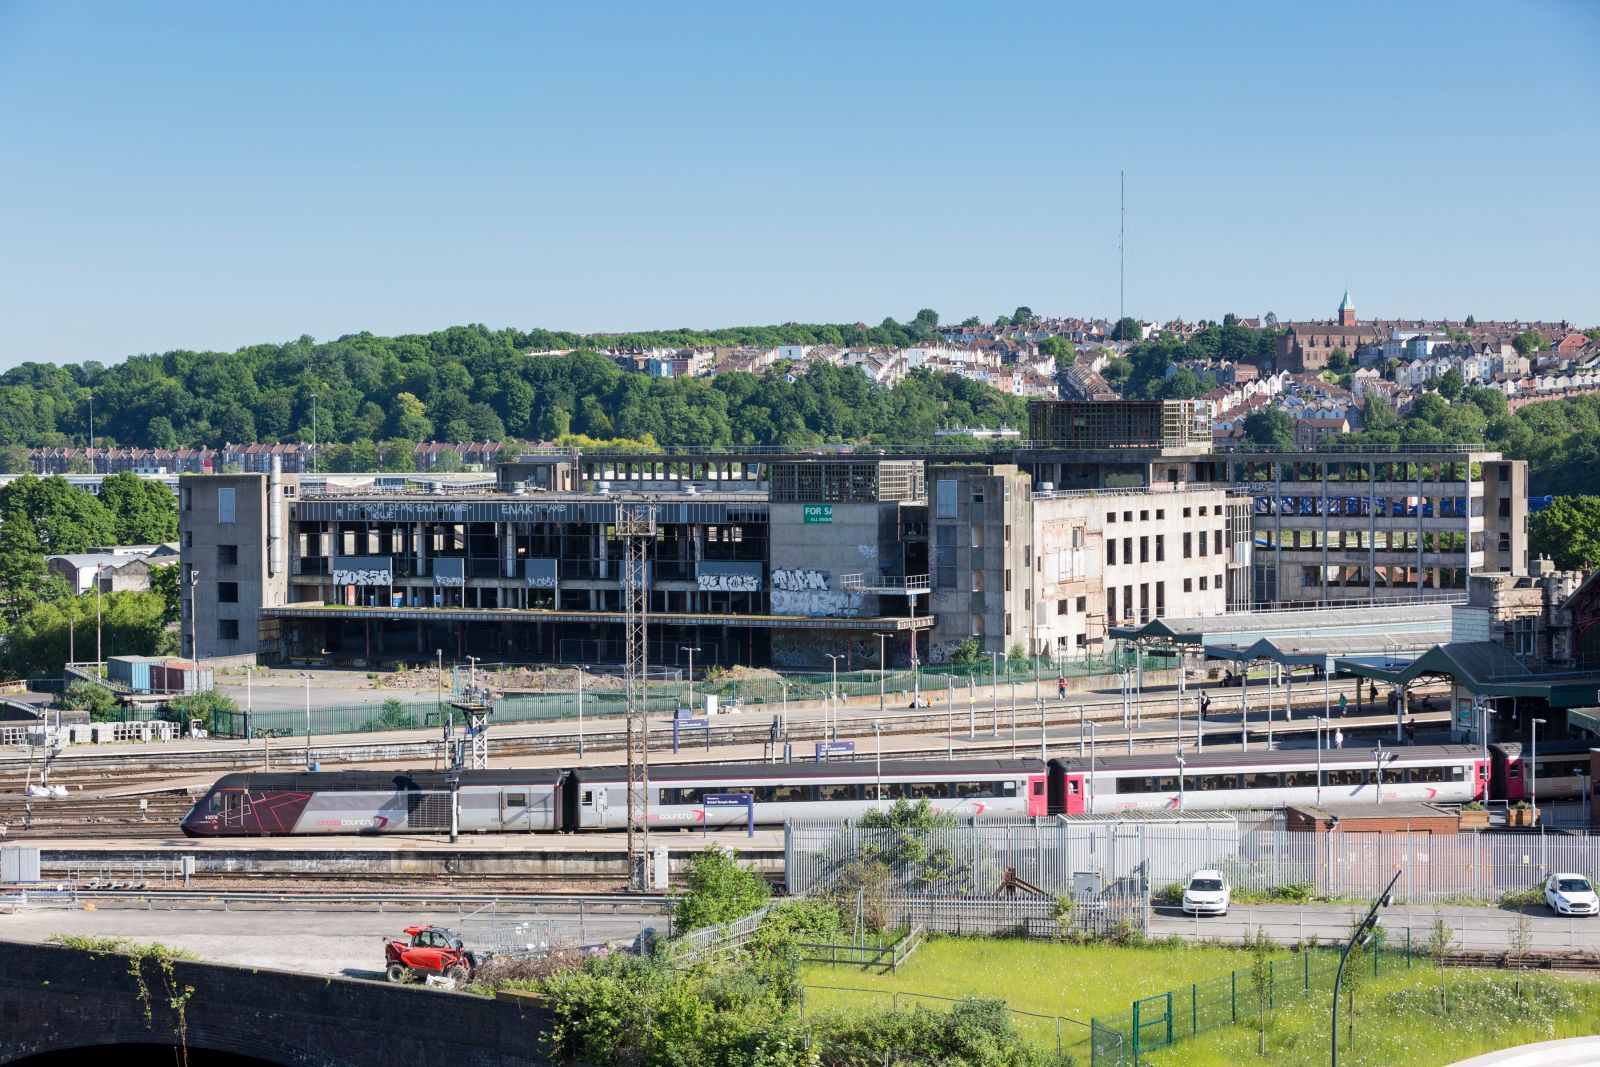 The run down building beside Temple Meads will soon be a new campus. 